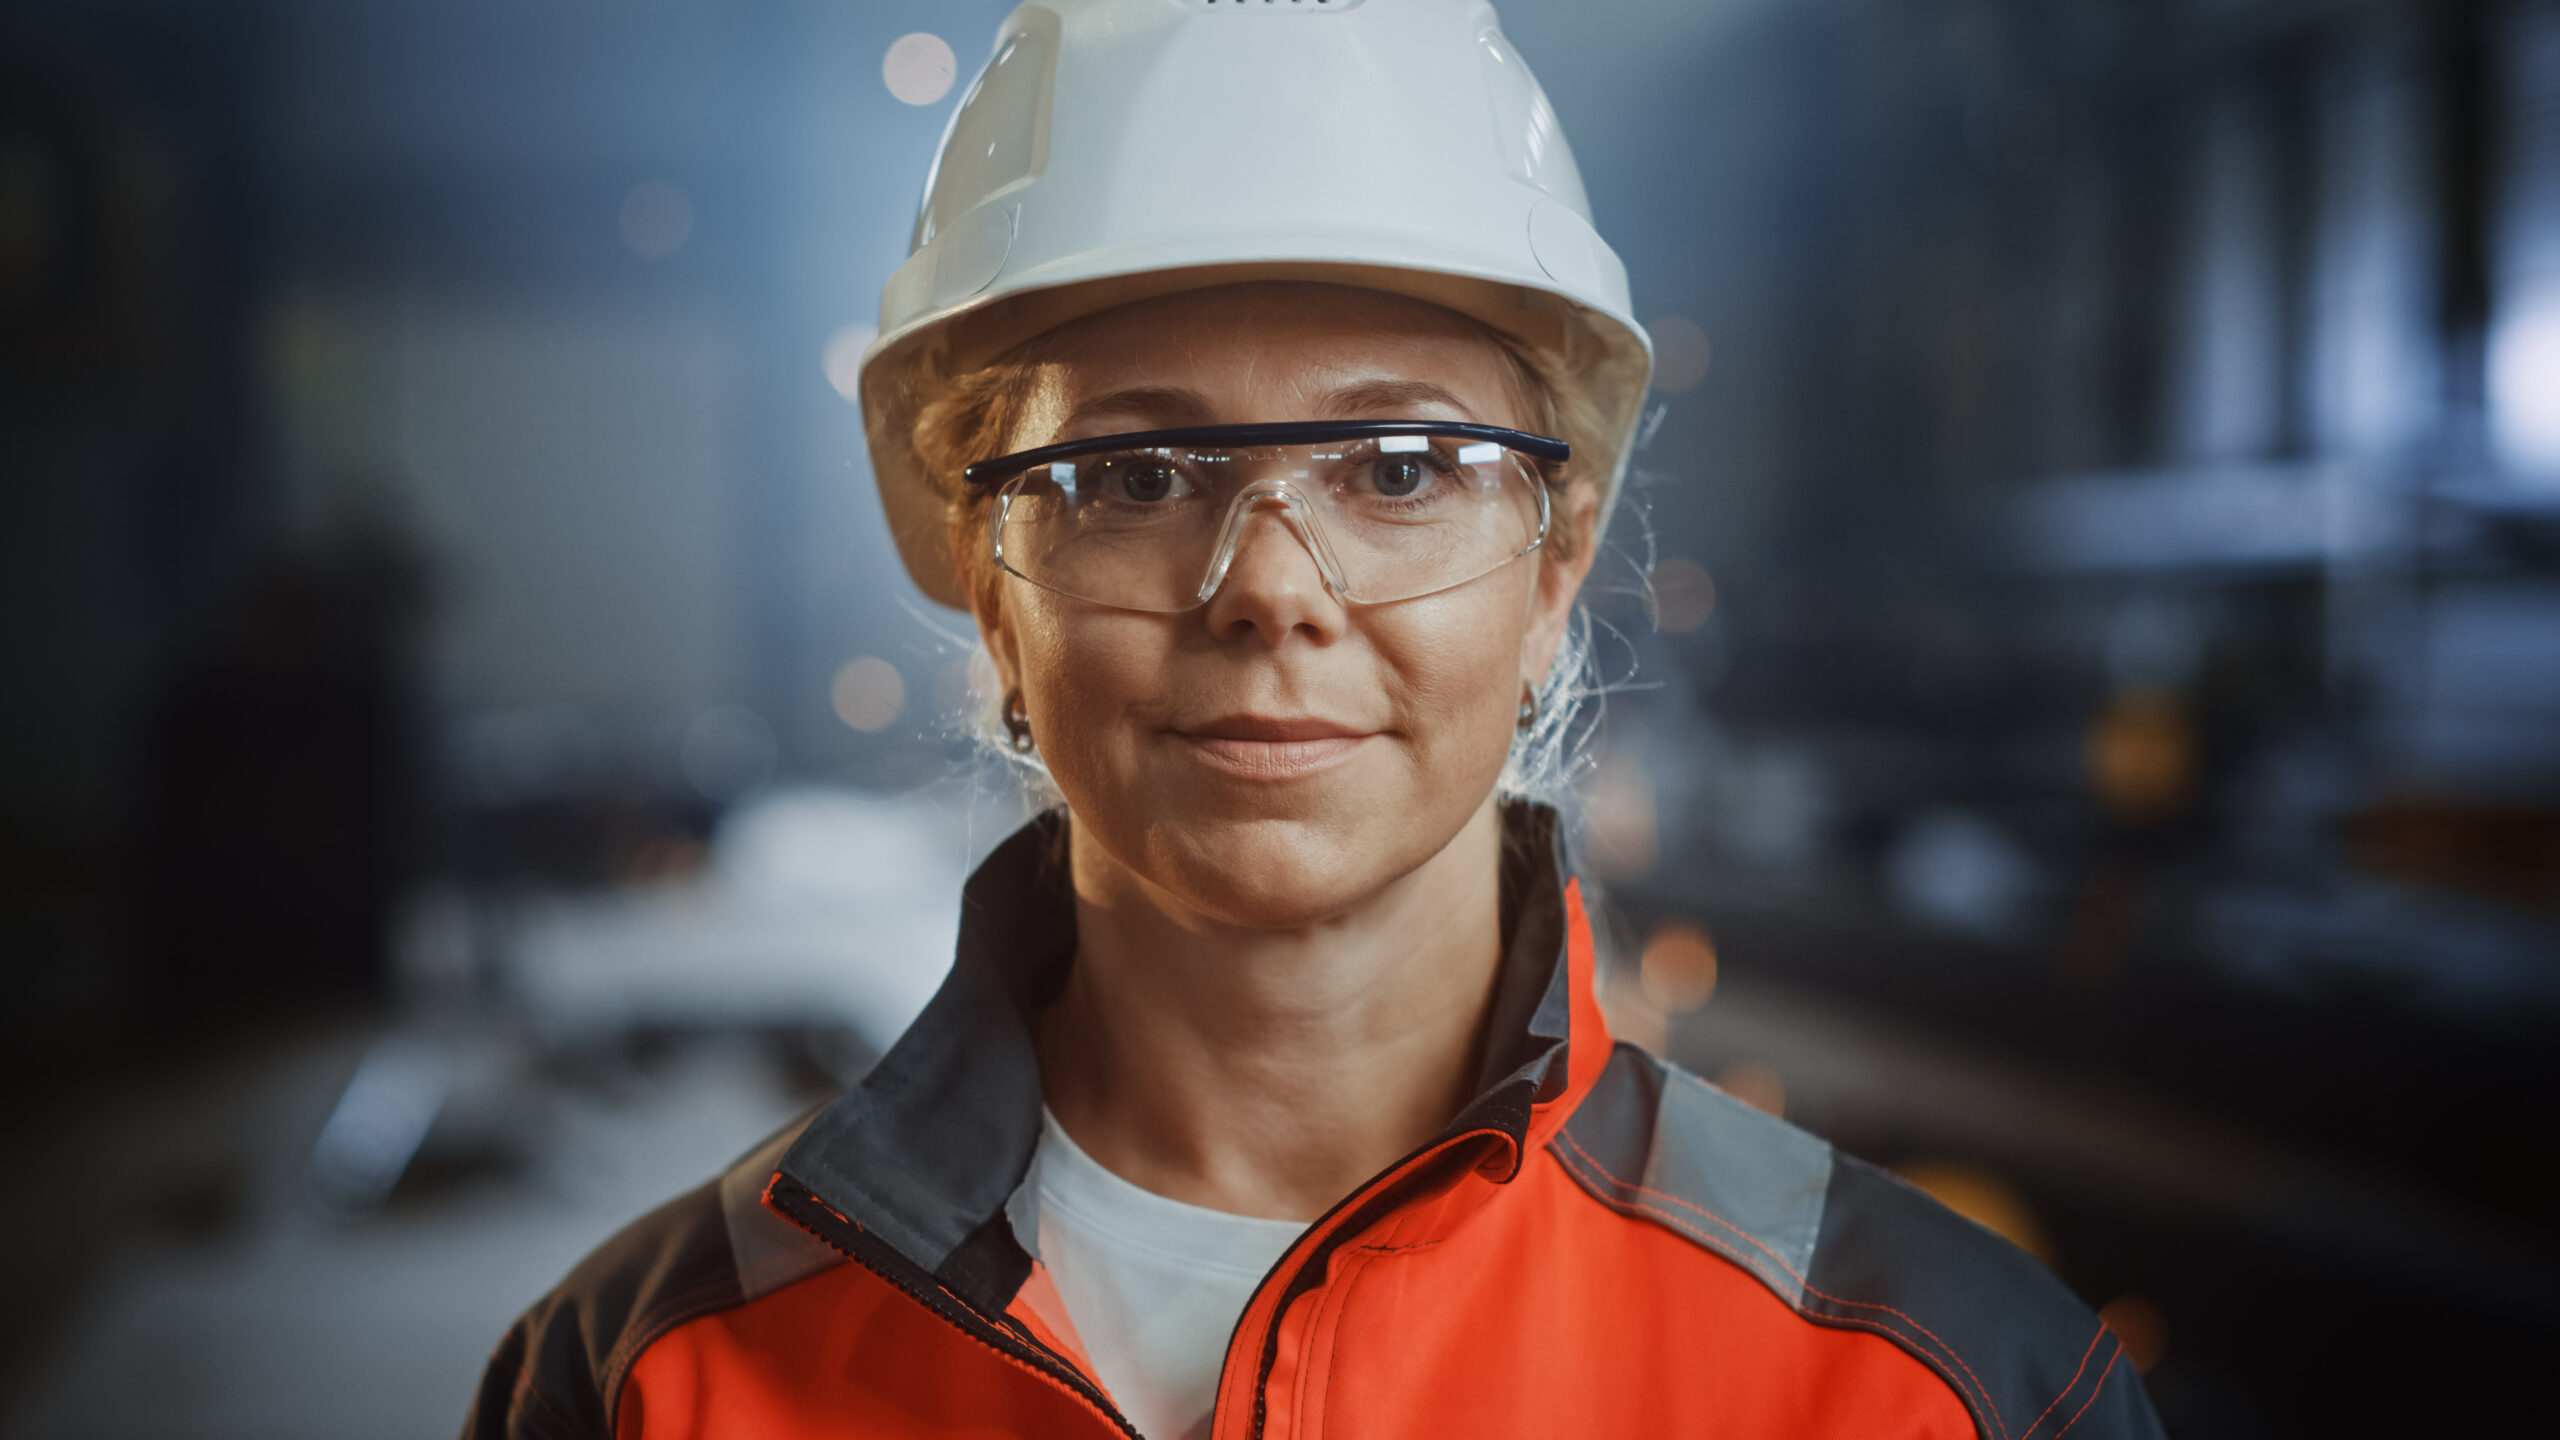 Five Things To Consider When Selecting Prescription Safety Glasses For  Construction Workers